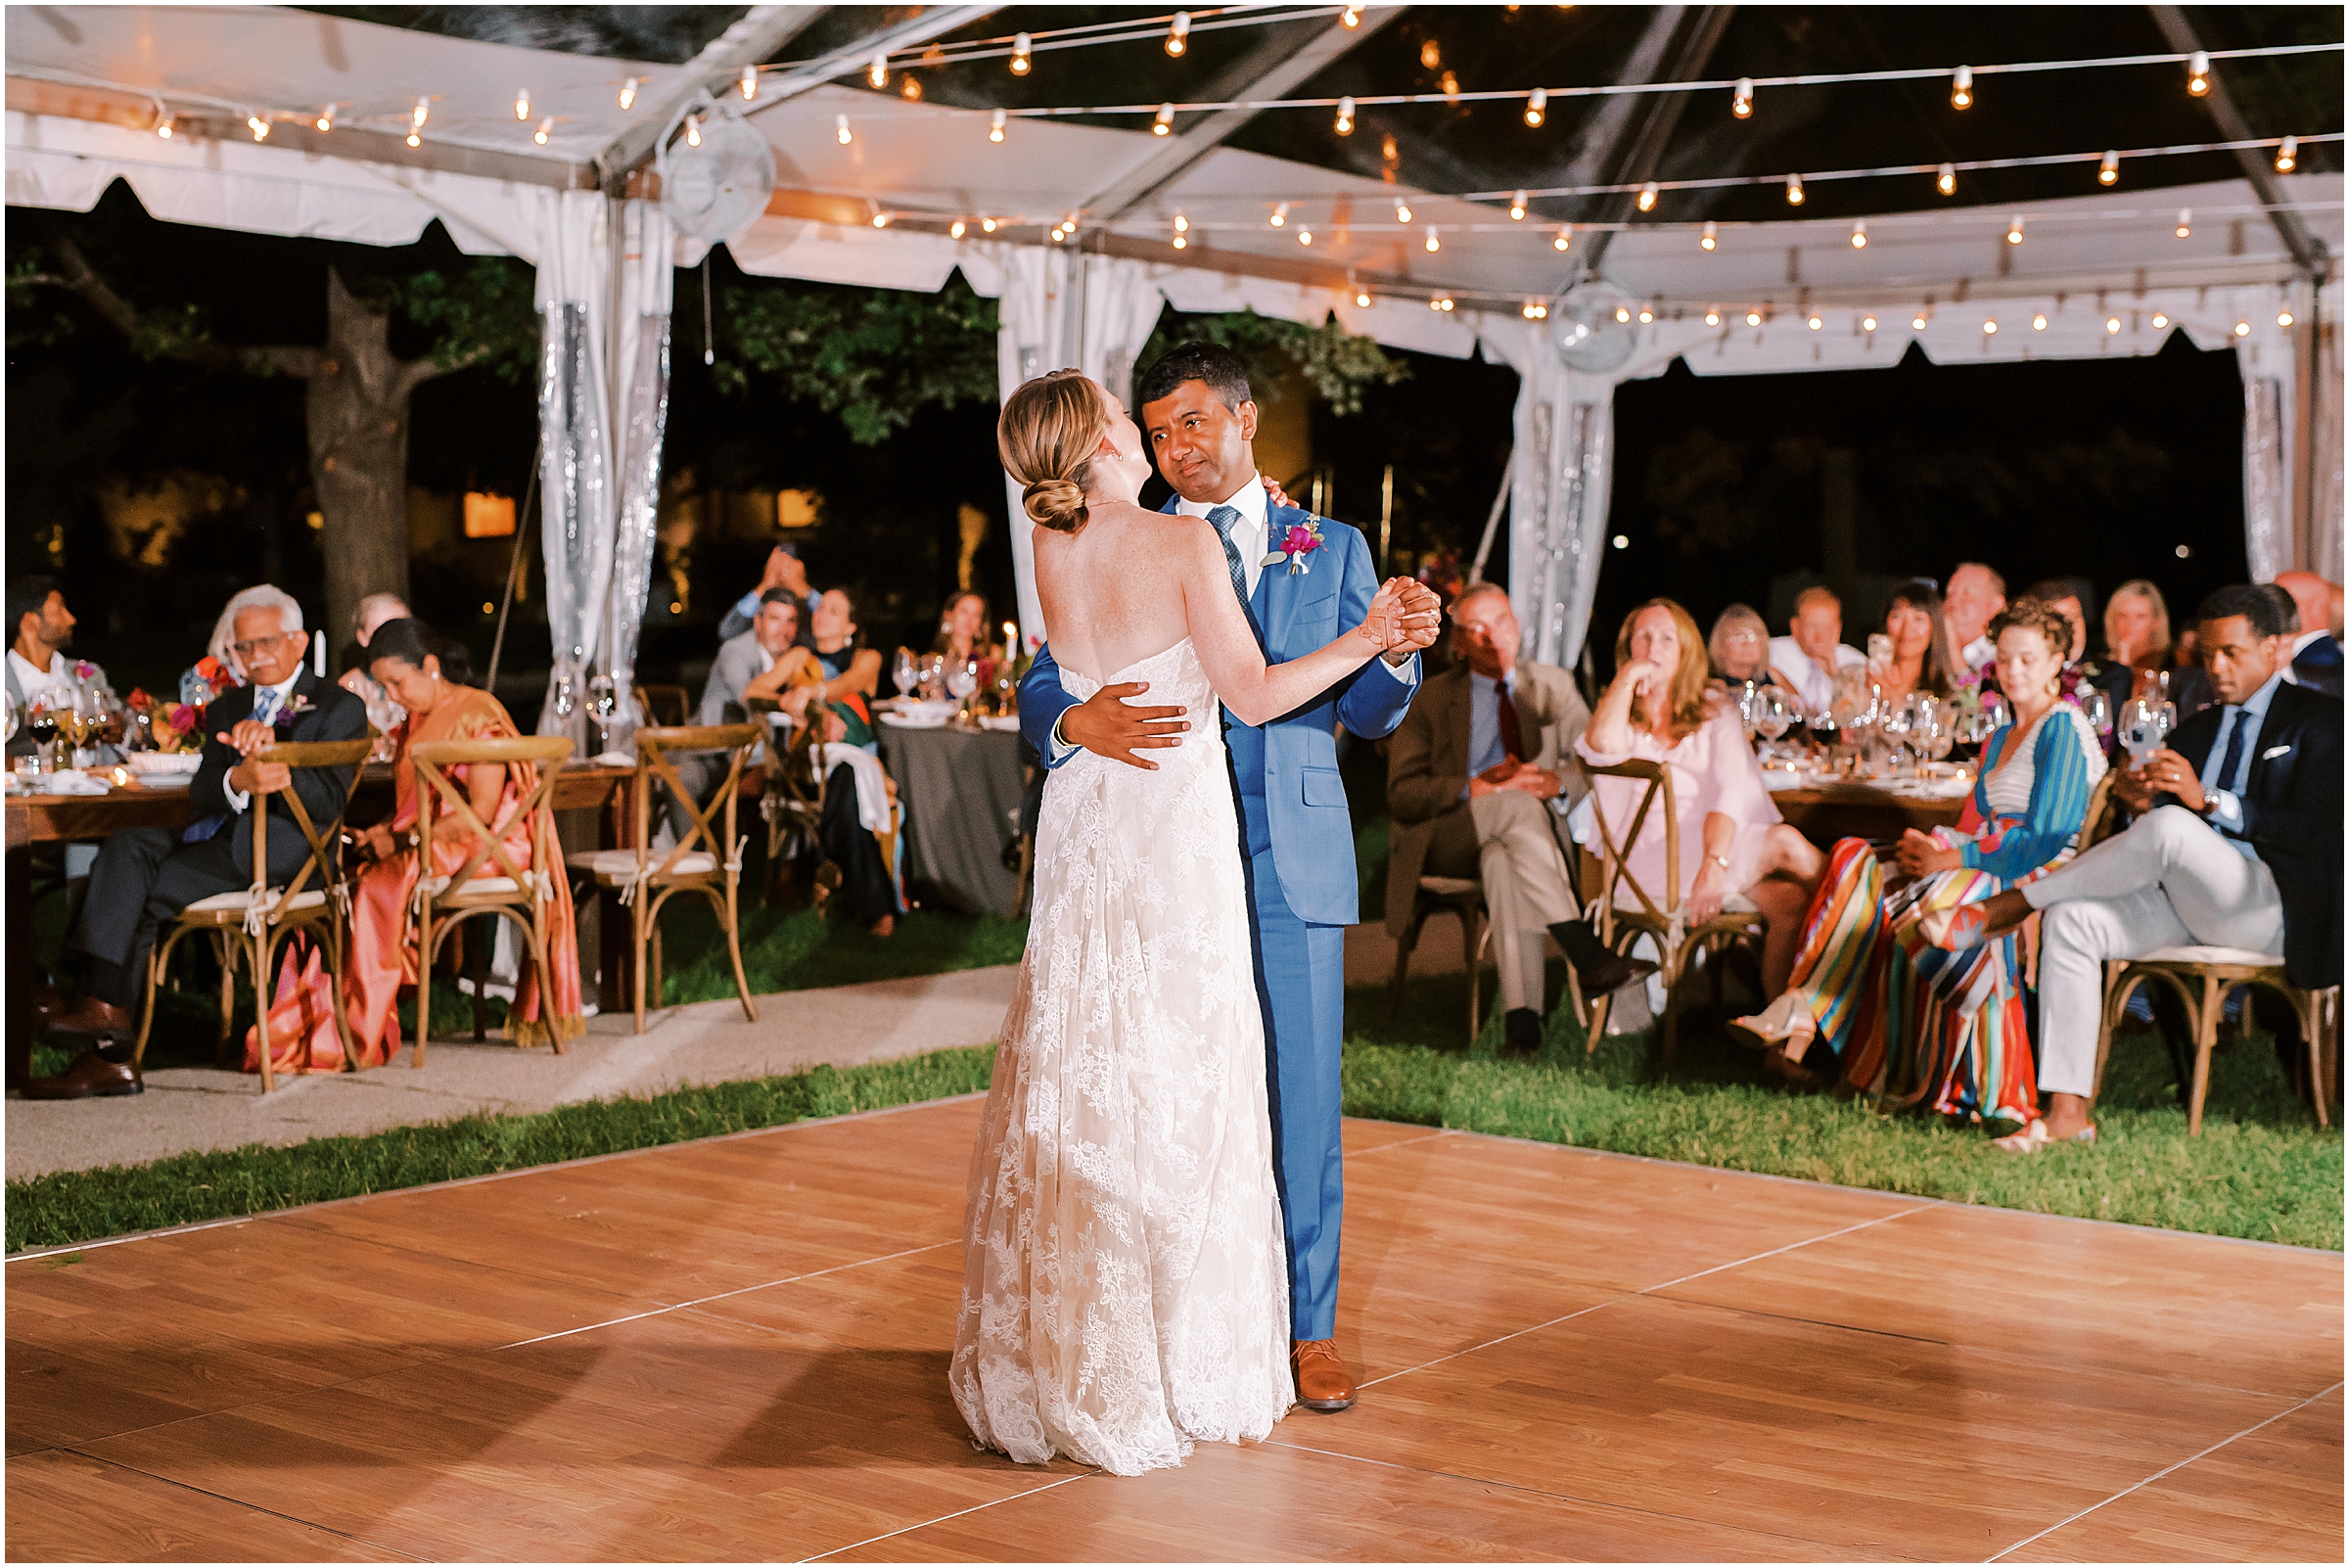 First dance between bride and groom at wedding at President Lincoln's Cottage